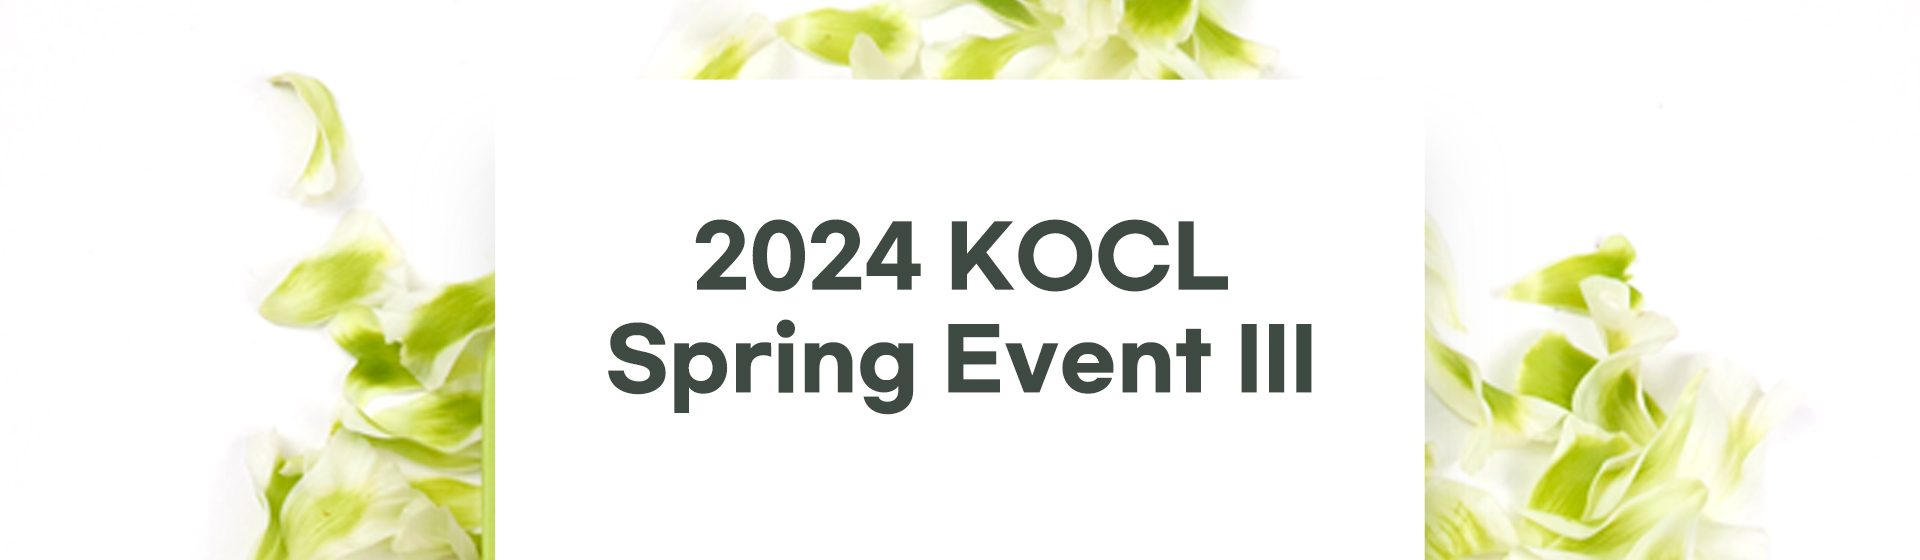 2024 KOCL SPRING EVENT III